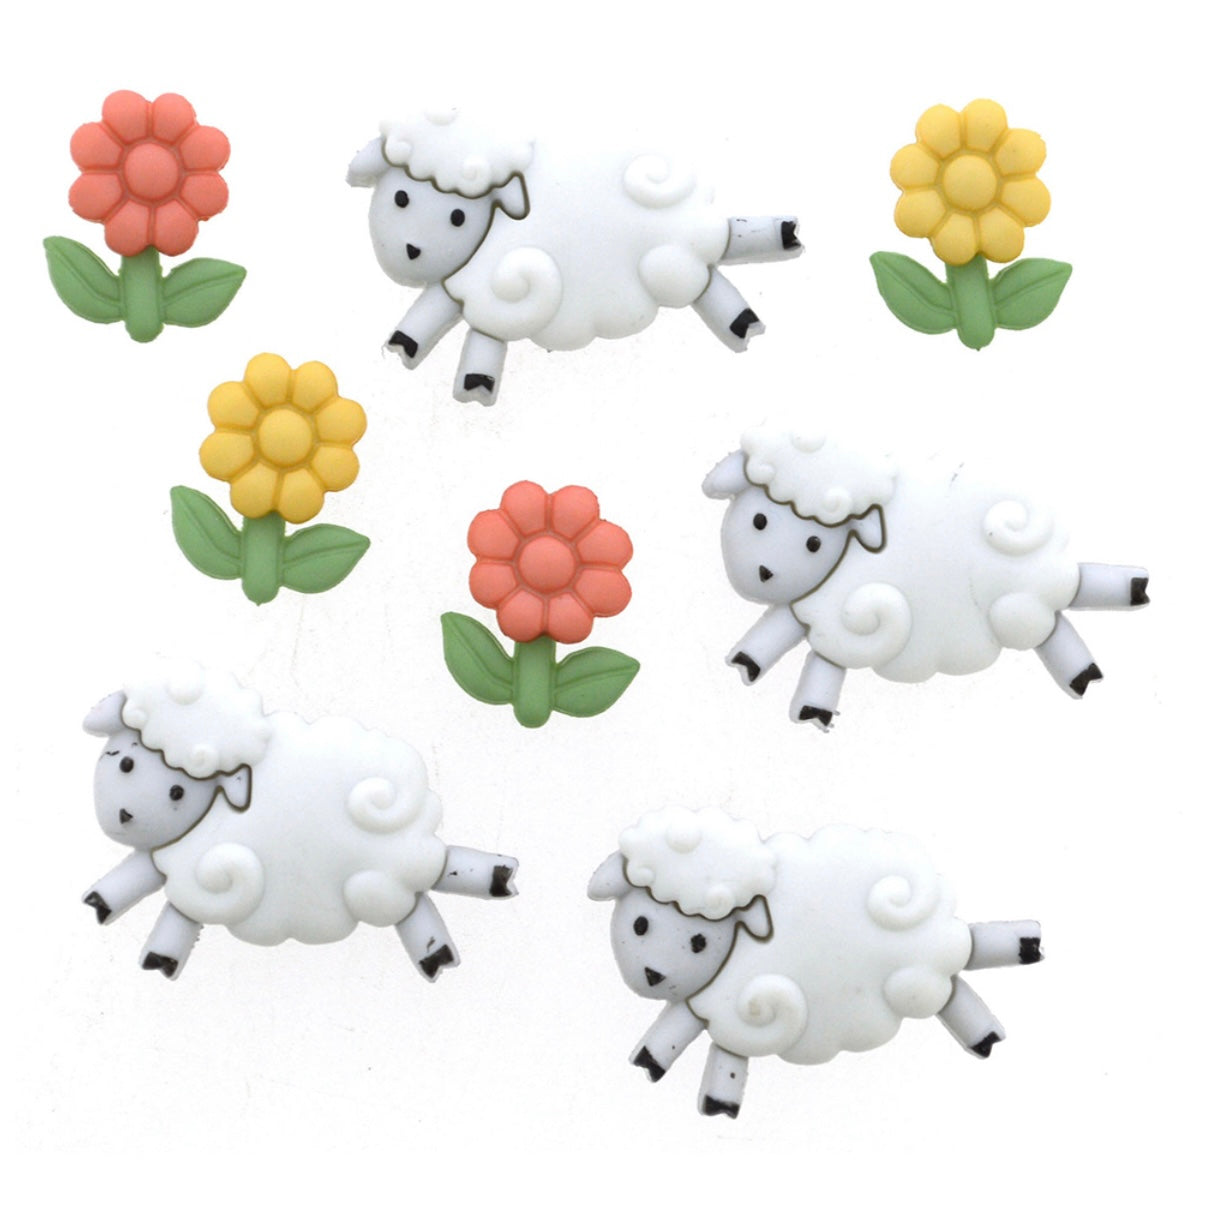 Novelty Buttons - Counting Sheep - 8pcs